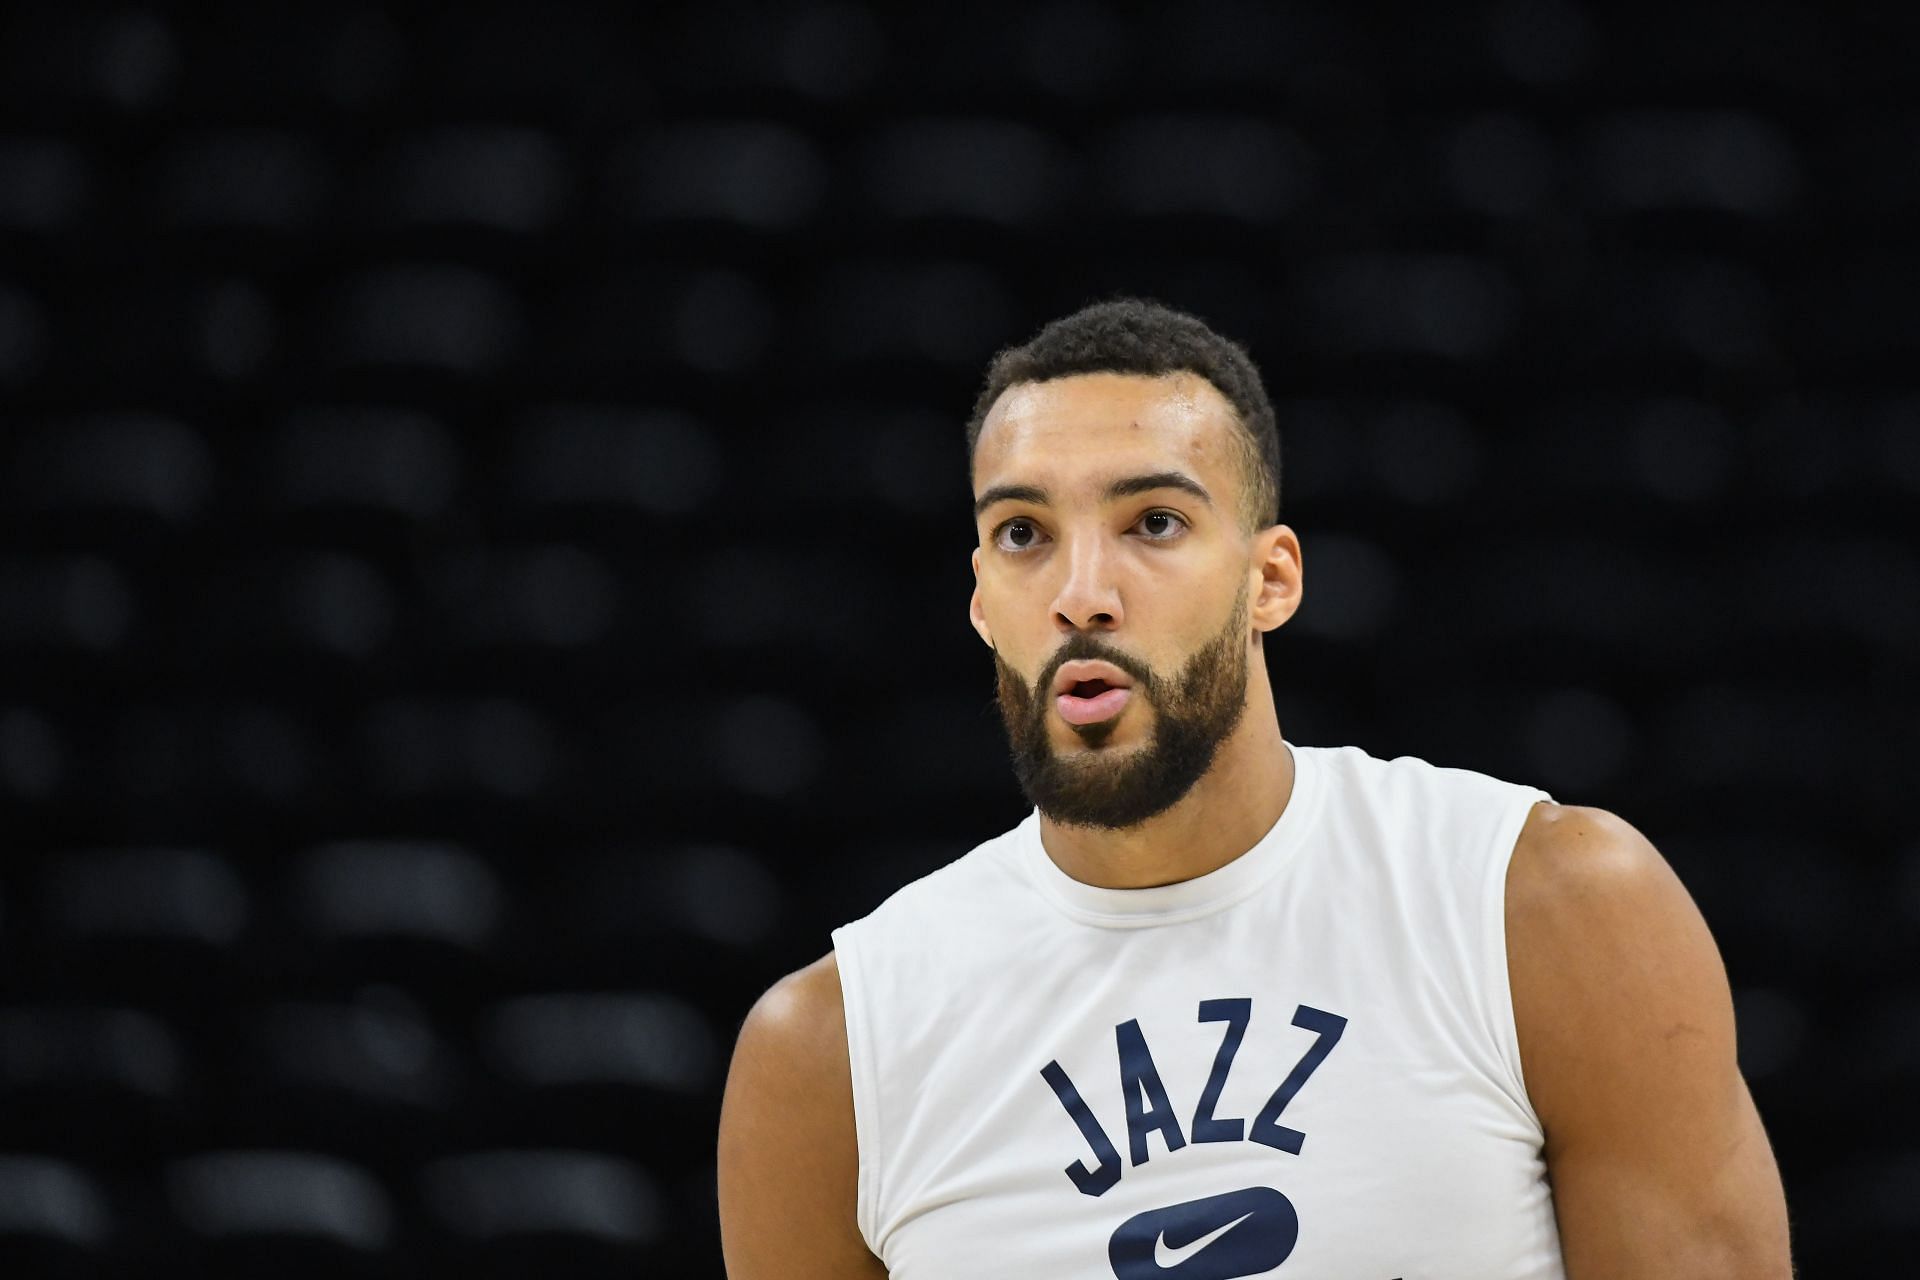 Rudy Gobert could be on his way out of Utah according to latest NBA rumors